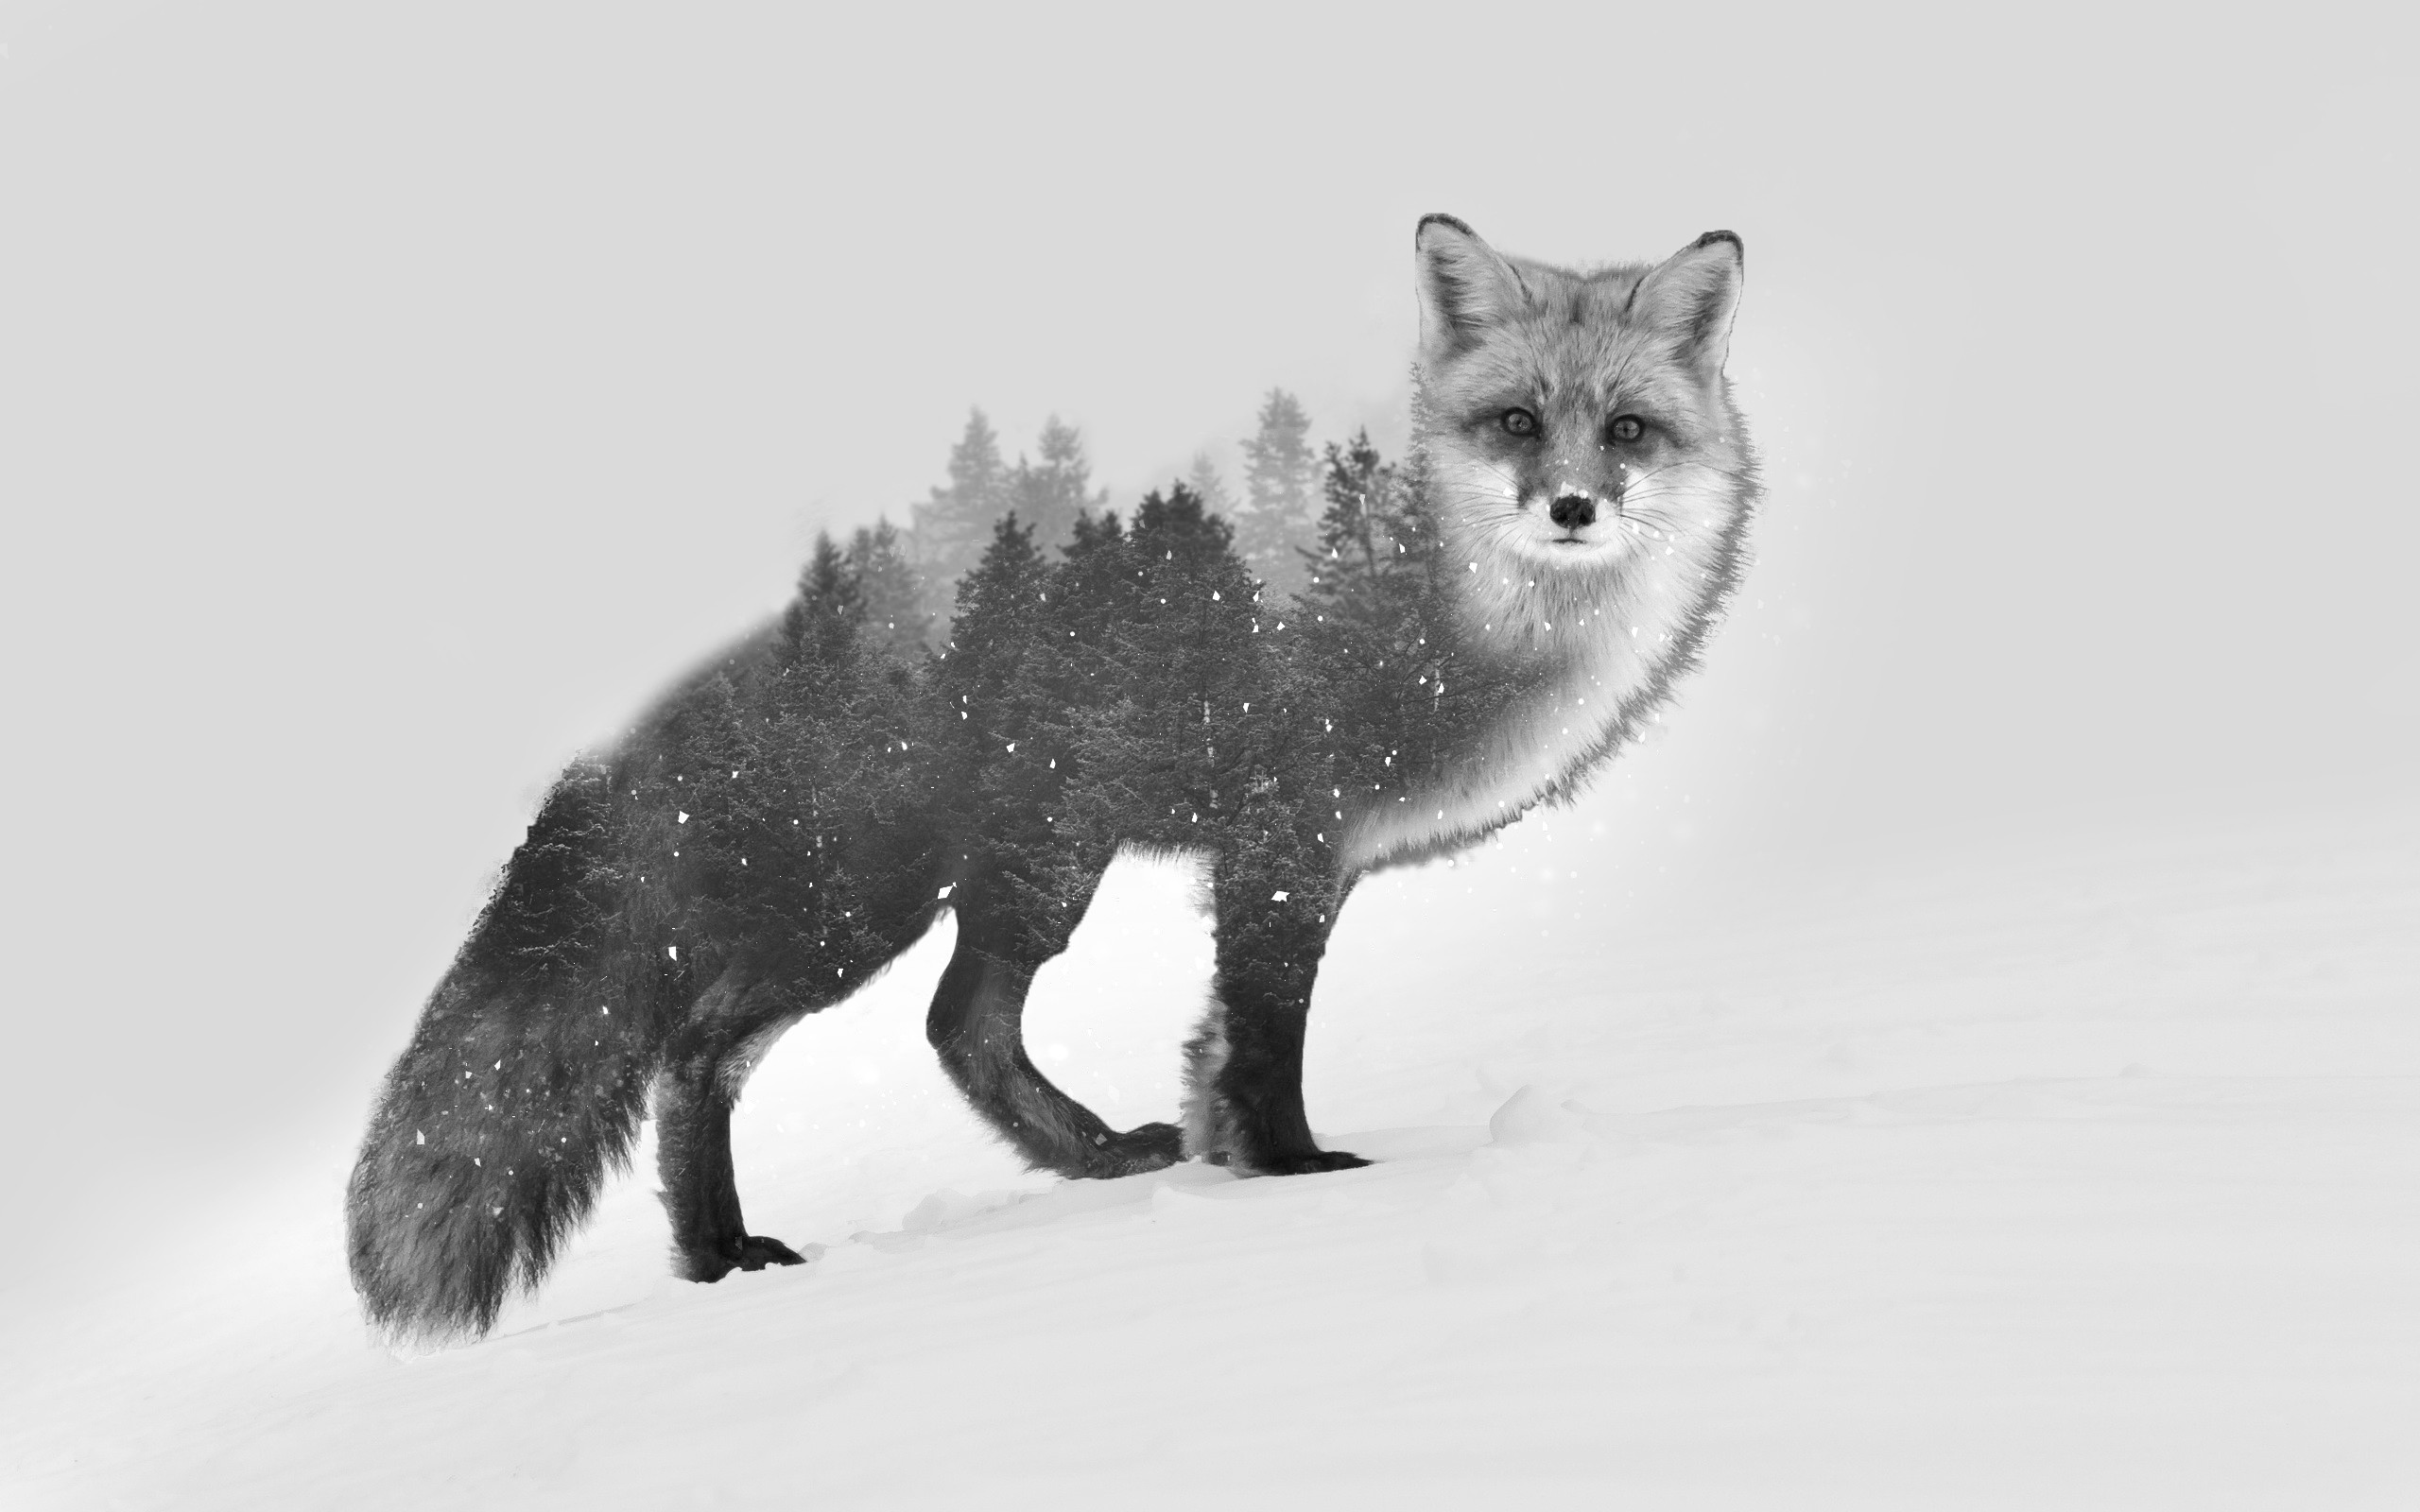 General 2560x1600 fox double exposure black white photo manipulation animals winter snow white background trees forest nature monochrome gray